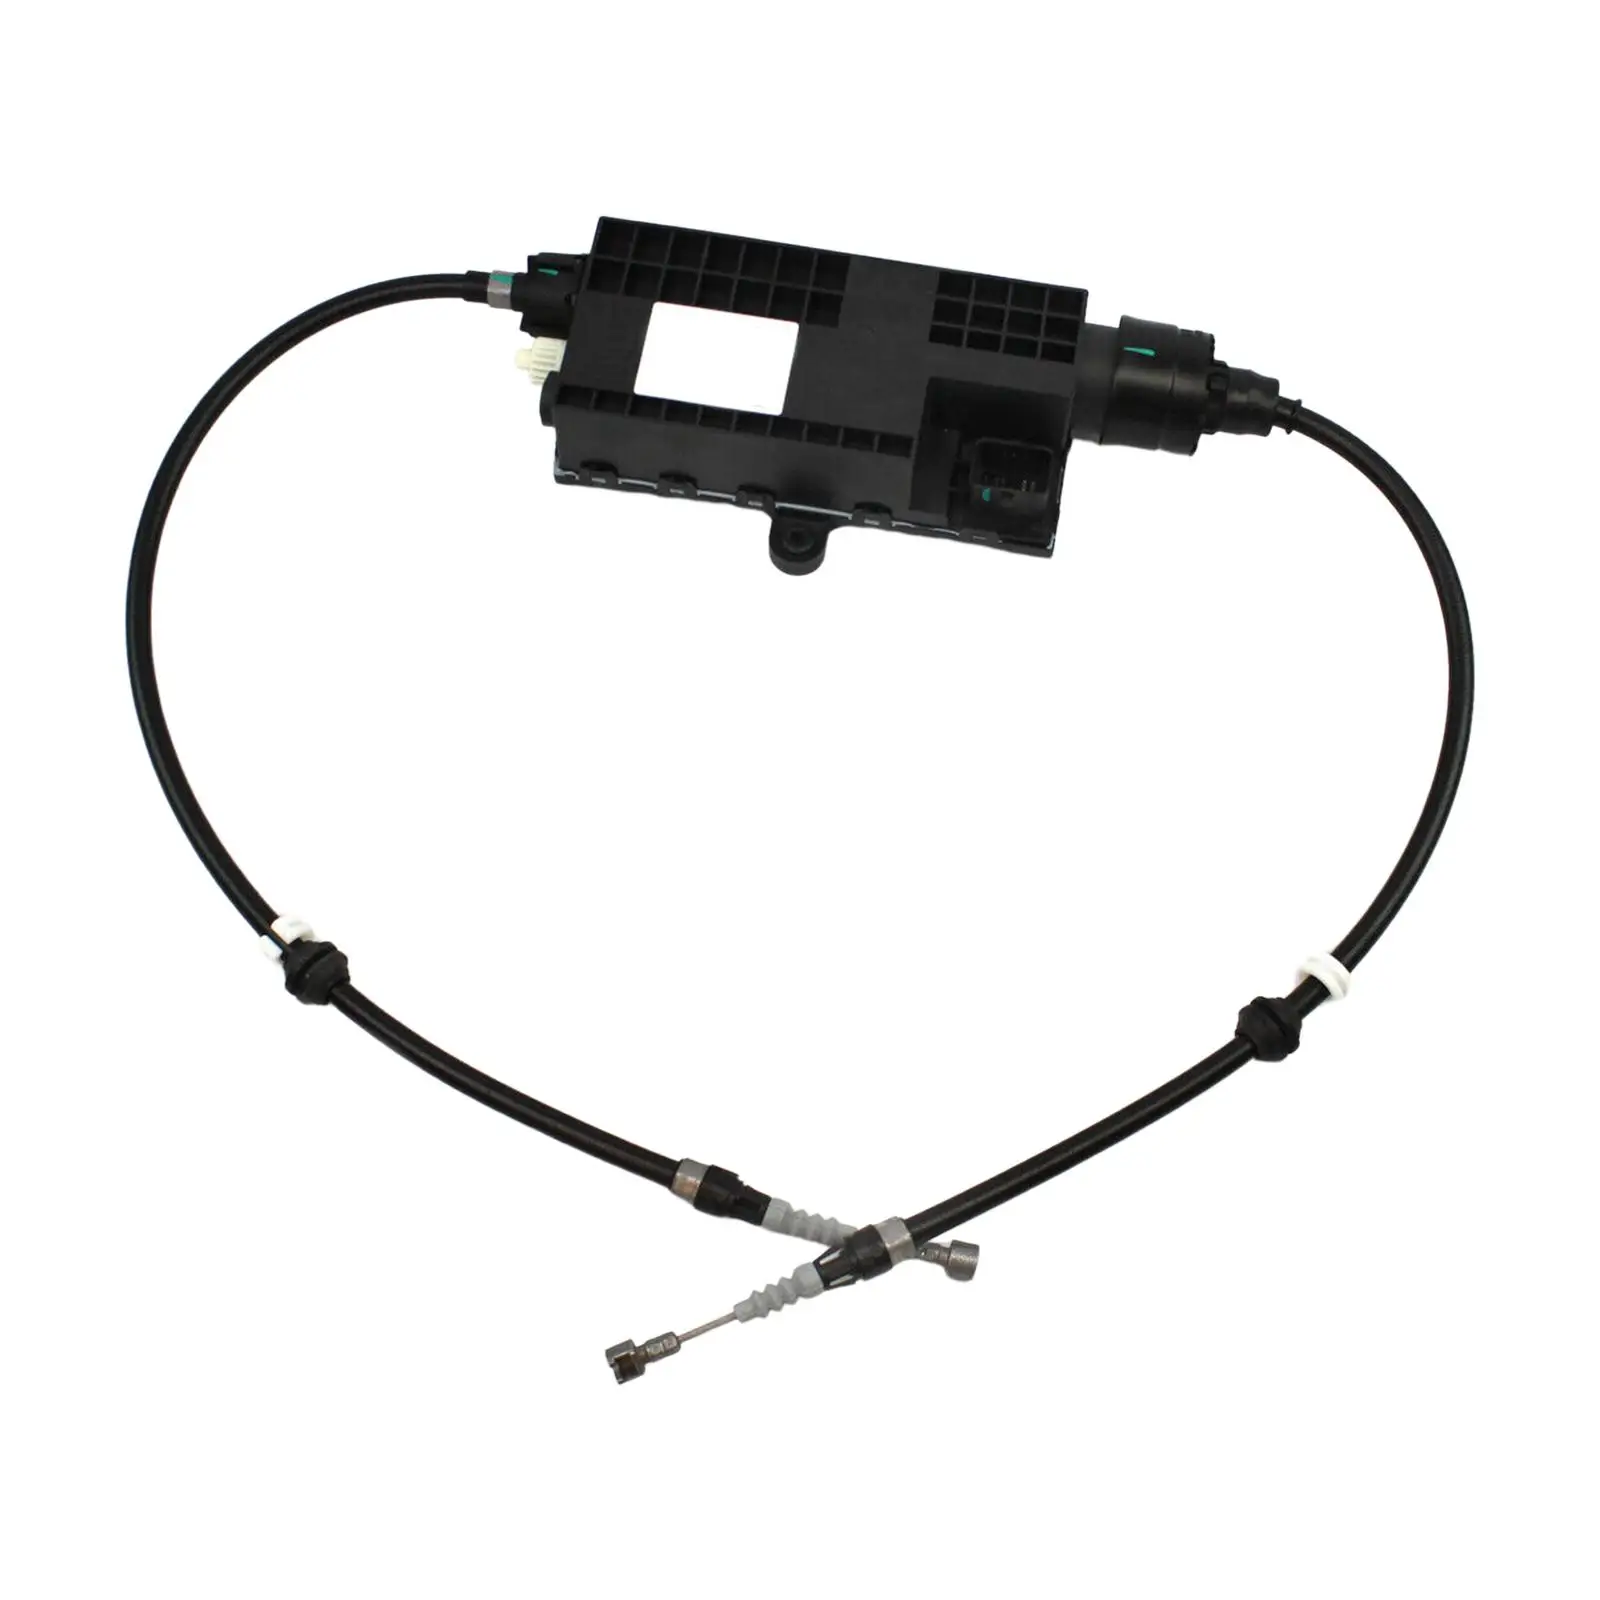 4479068700 Professional Repair Parts Accessory Black Parking Brake Actuator Replaces for Mercedes-benz V-class vito 447